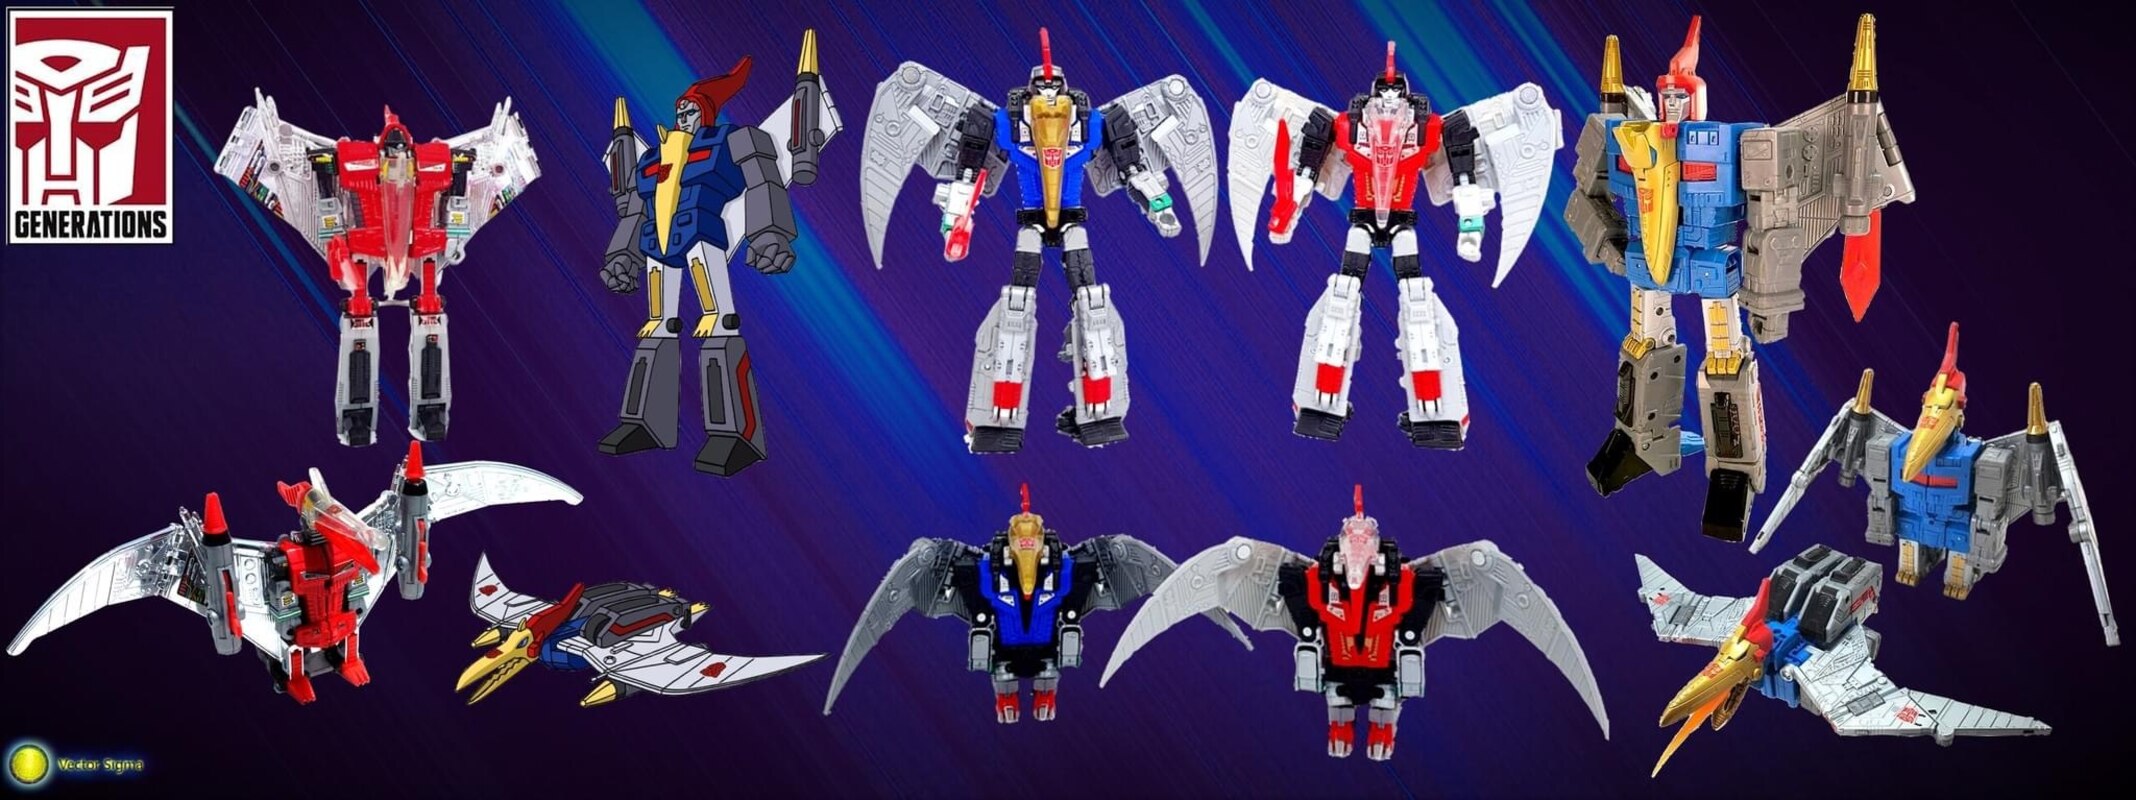 Dinobot Swoop Through the Years Transformers Compared